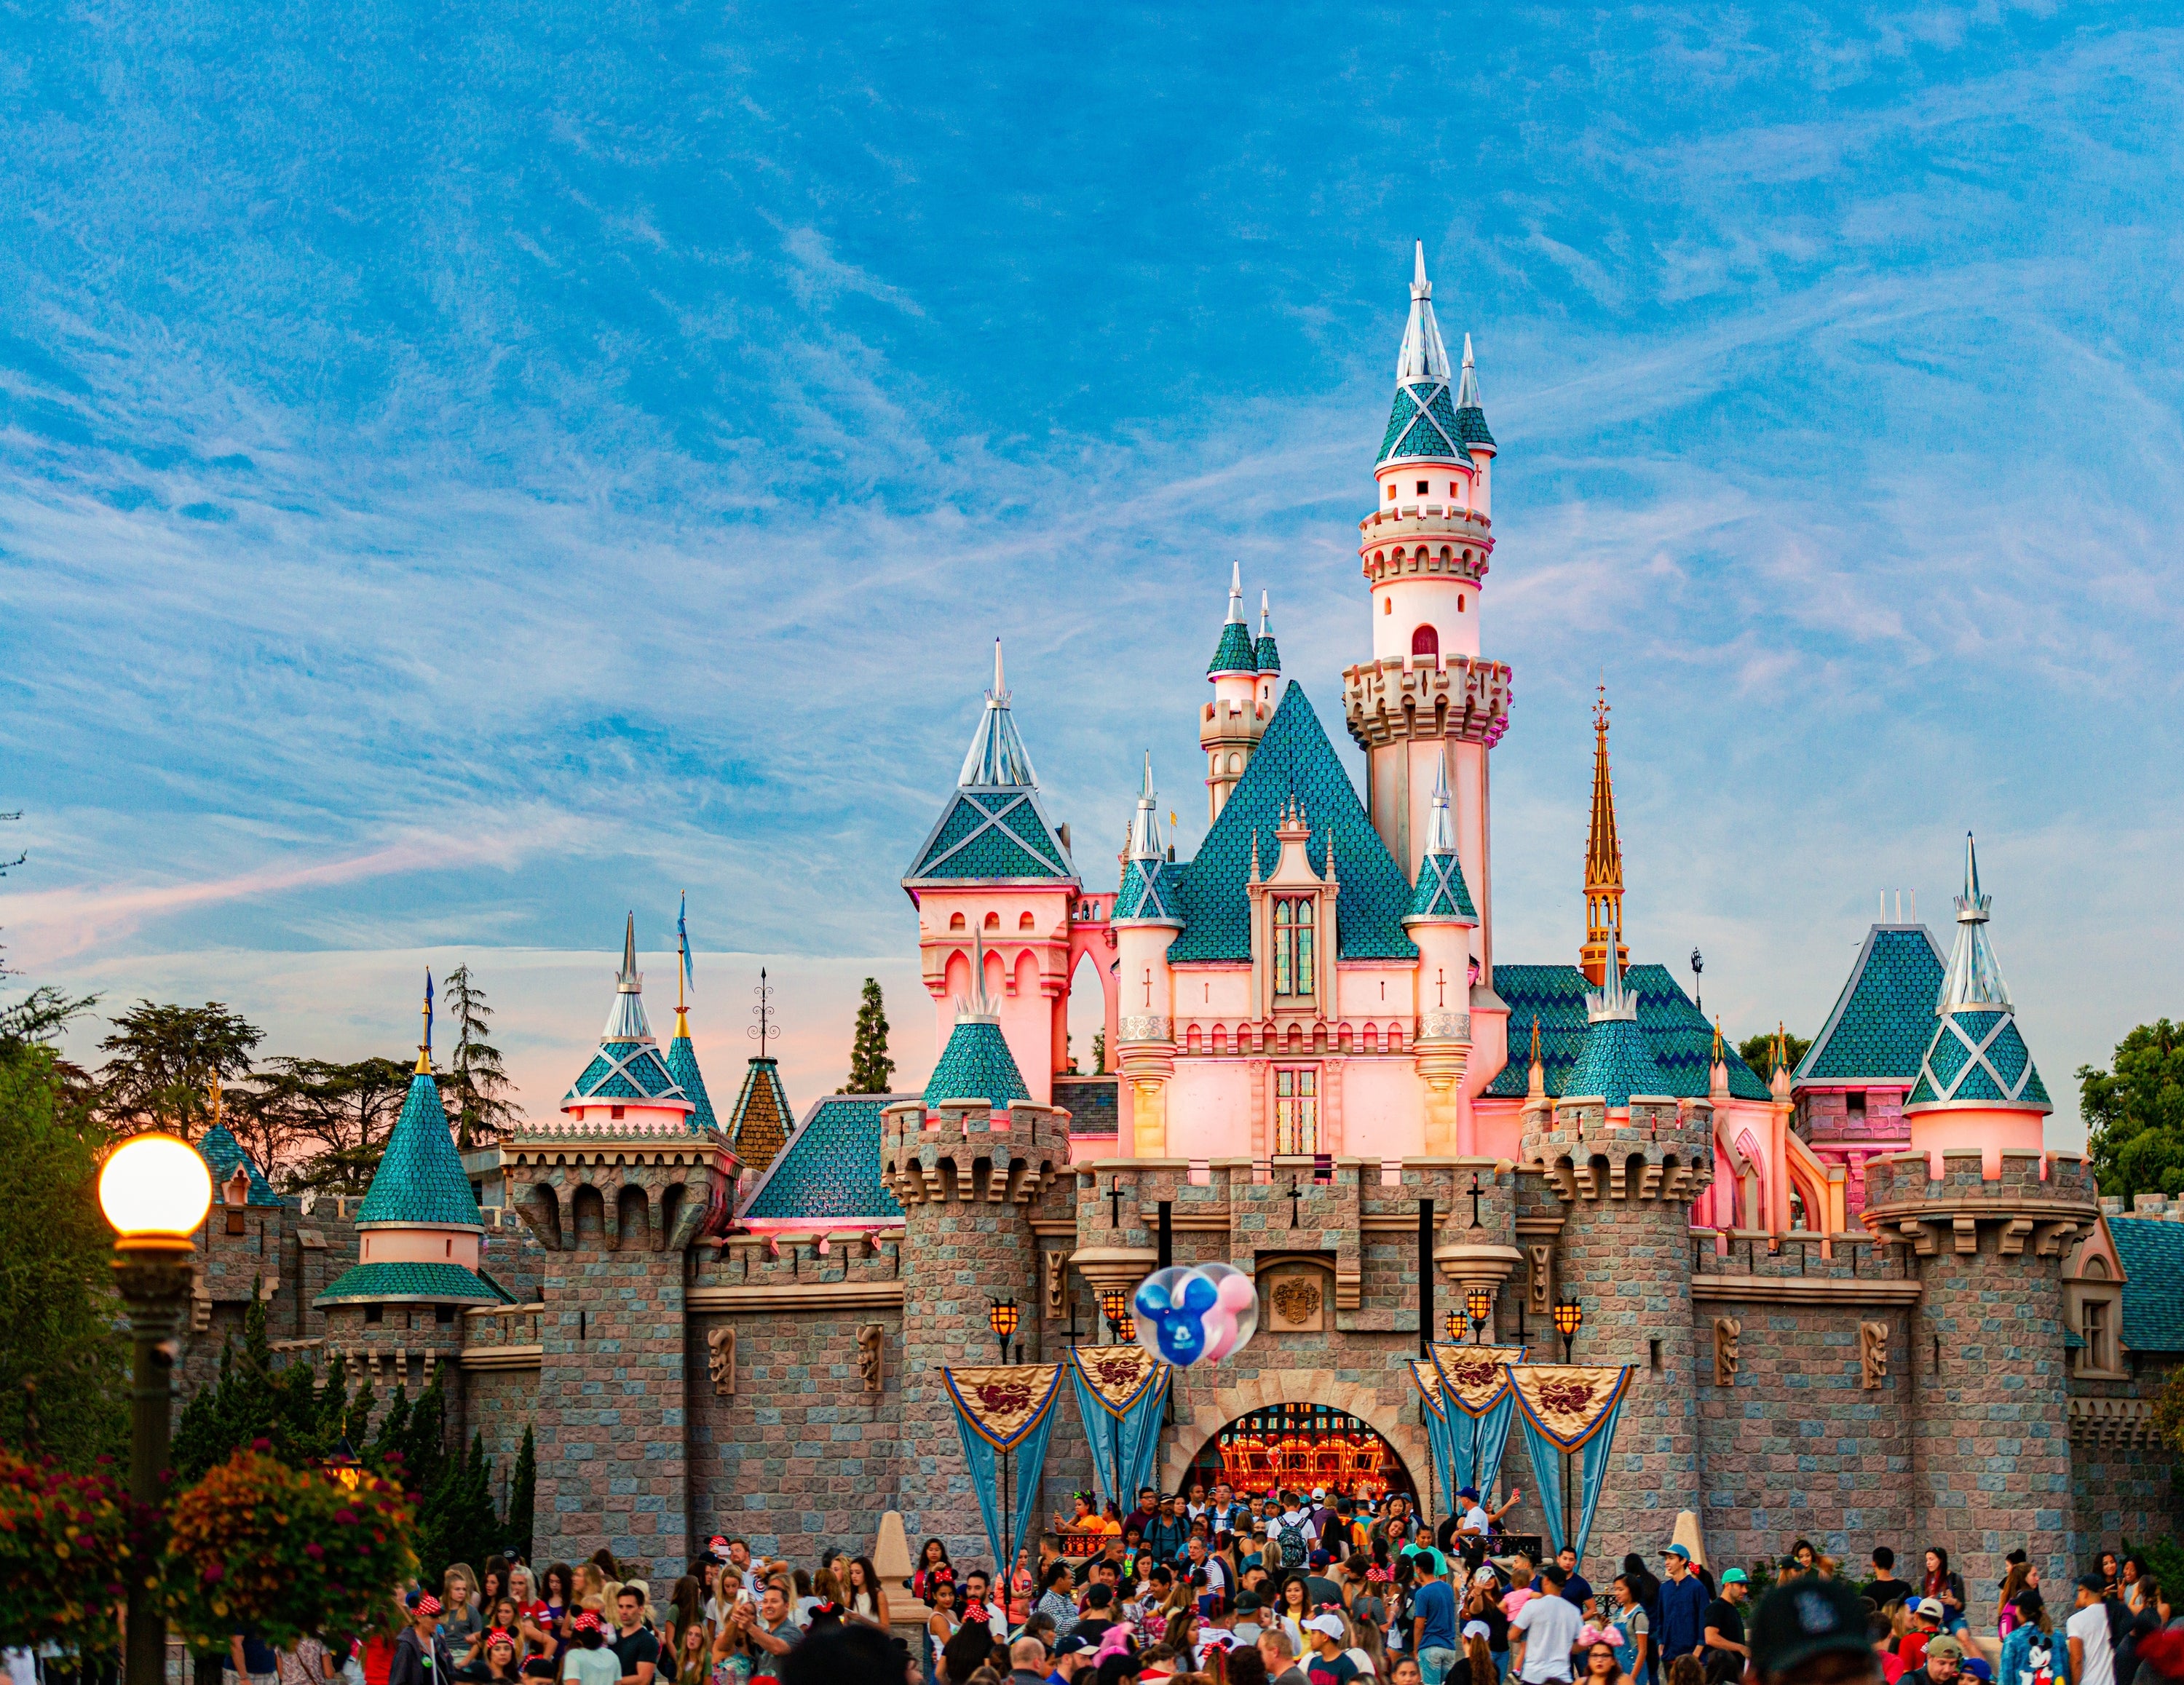 Top 10 Things to Do in Disneyland - A Guide for First-Time Visitors